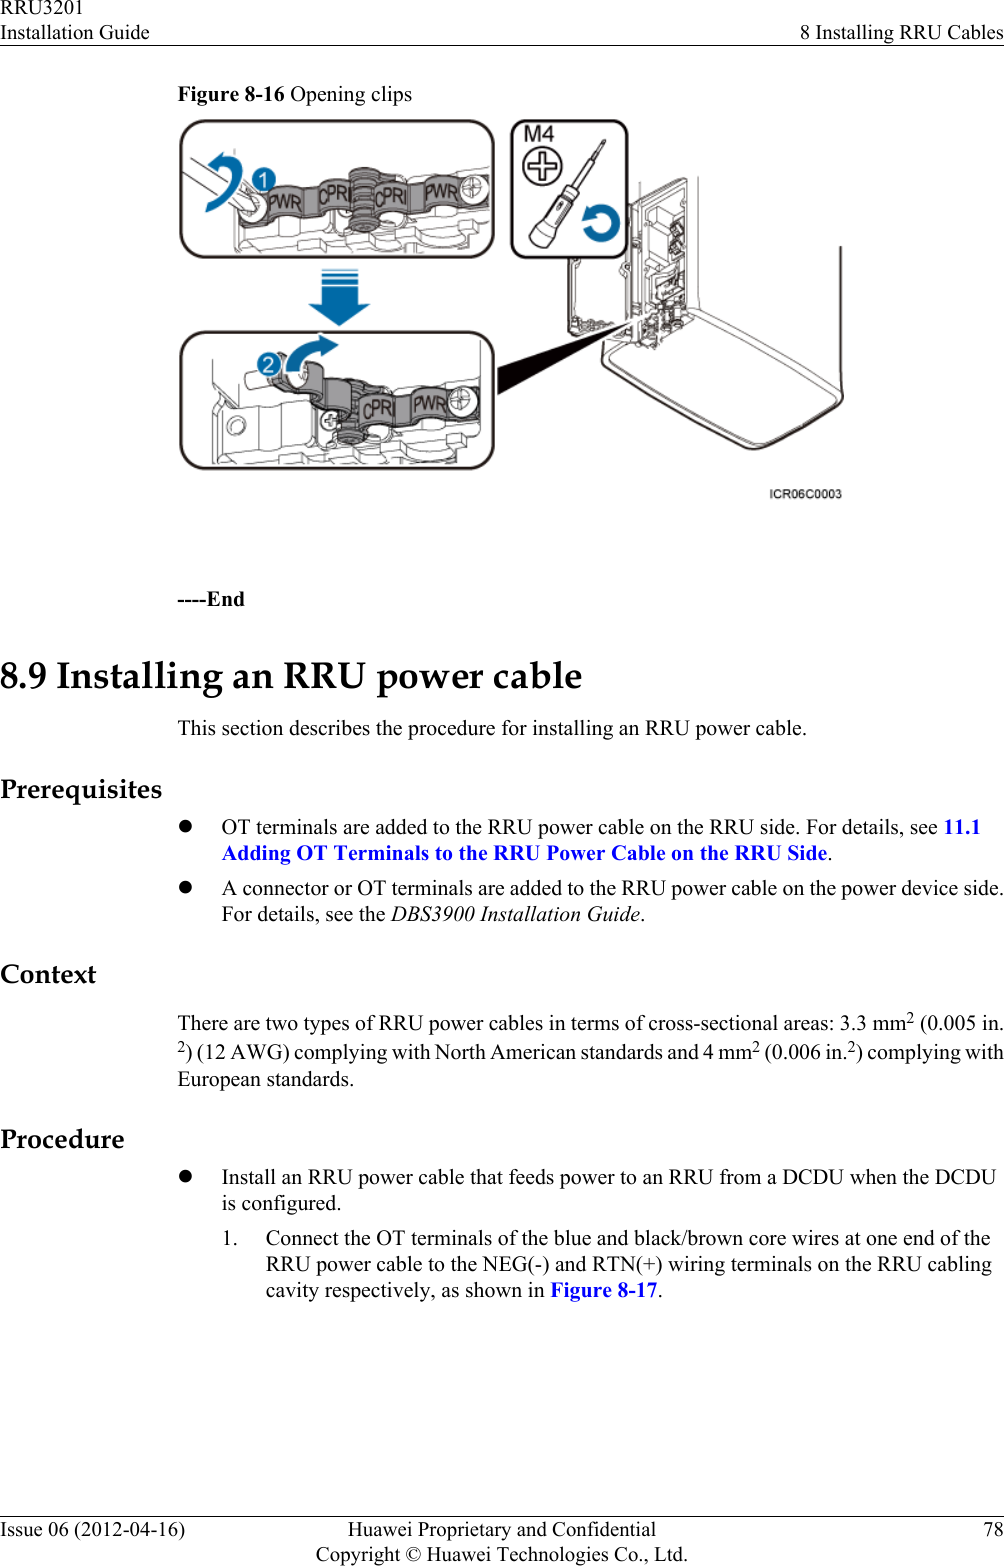 Figure 8-16 Opening clips ----End8.9 Installing an RRU power cableThis section describes the procedure for installing an RRU power cable.PrerequisiteslOT terminals are added to the RRU power cable on the RRU side. For details, see 11.1Adding OT Terminals to the RRU Power Cable on the RRU Side.lA connector or OT terminals are added to the RRU power cable on the power device side.For details, see the DBS3900 Installation Guide.ContextThere are two types of RRU power cables in terms of cross-sectional areas: 3.3 mm2 (0.005 in.2) (12 AWG) complying with North American standards and 4 mm2 (0.006 in.2) complying withEuropean standards.ProcedurelInstall an RRU power cable that feeds power to an RRU from a DCDU when the DCDUis configured.1. Connect the OT terminals of the blue and black/brown core wires at one end of theRRU power cable to the NEG(-) and RTN(+) wiring terminals on the RRU cablingcavity respectively, as shown in Figure 8-17.RRU3201Installation Guide 8 Installing RRU CablesIssue 06 (2012-04-16) Huawei Proprietary and ConfidentialCopyright © Huawei Technologies Co., Ltd.78